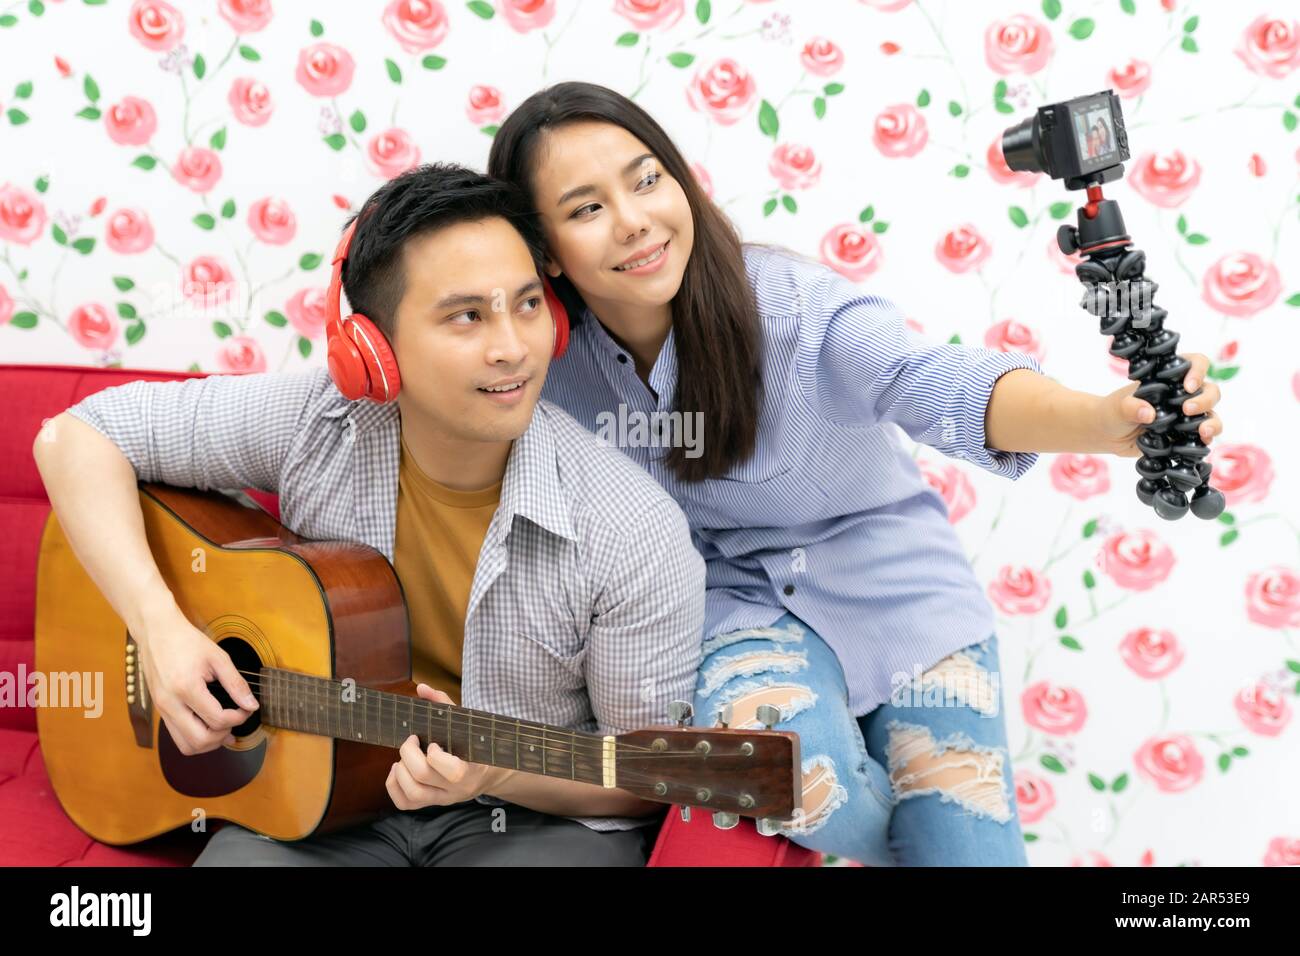 Duo singer do vlog live singing song with guitar to share on social media. Using for vlog social media influencer concept. Stock Photo